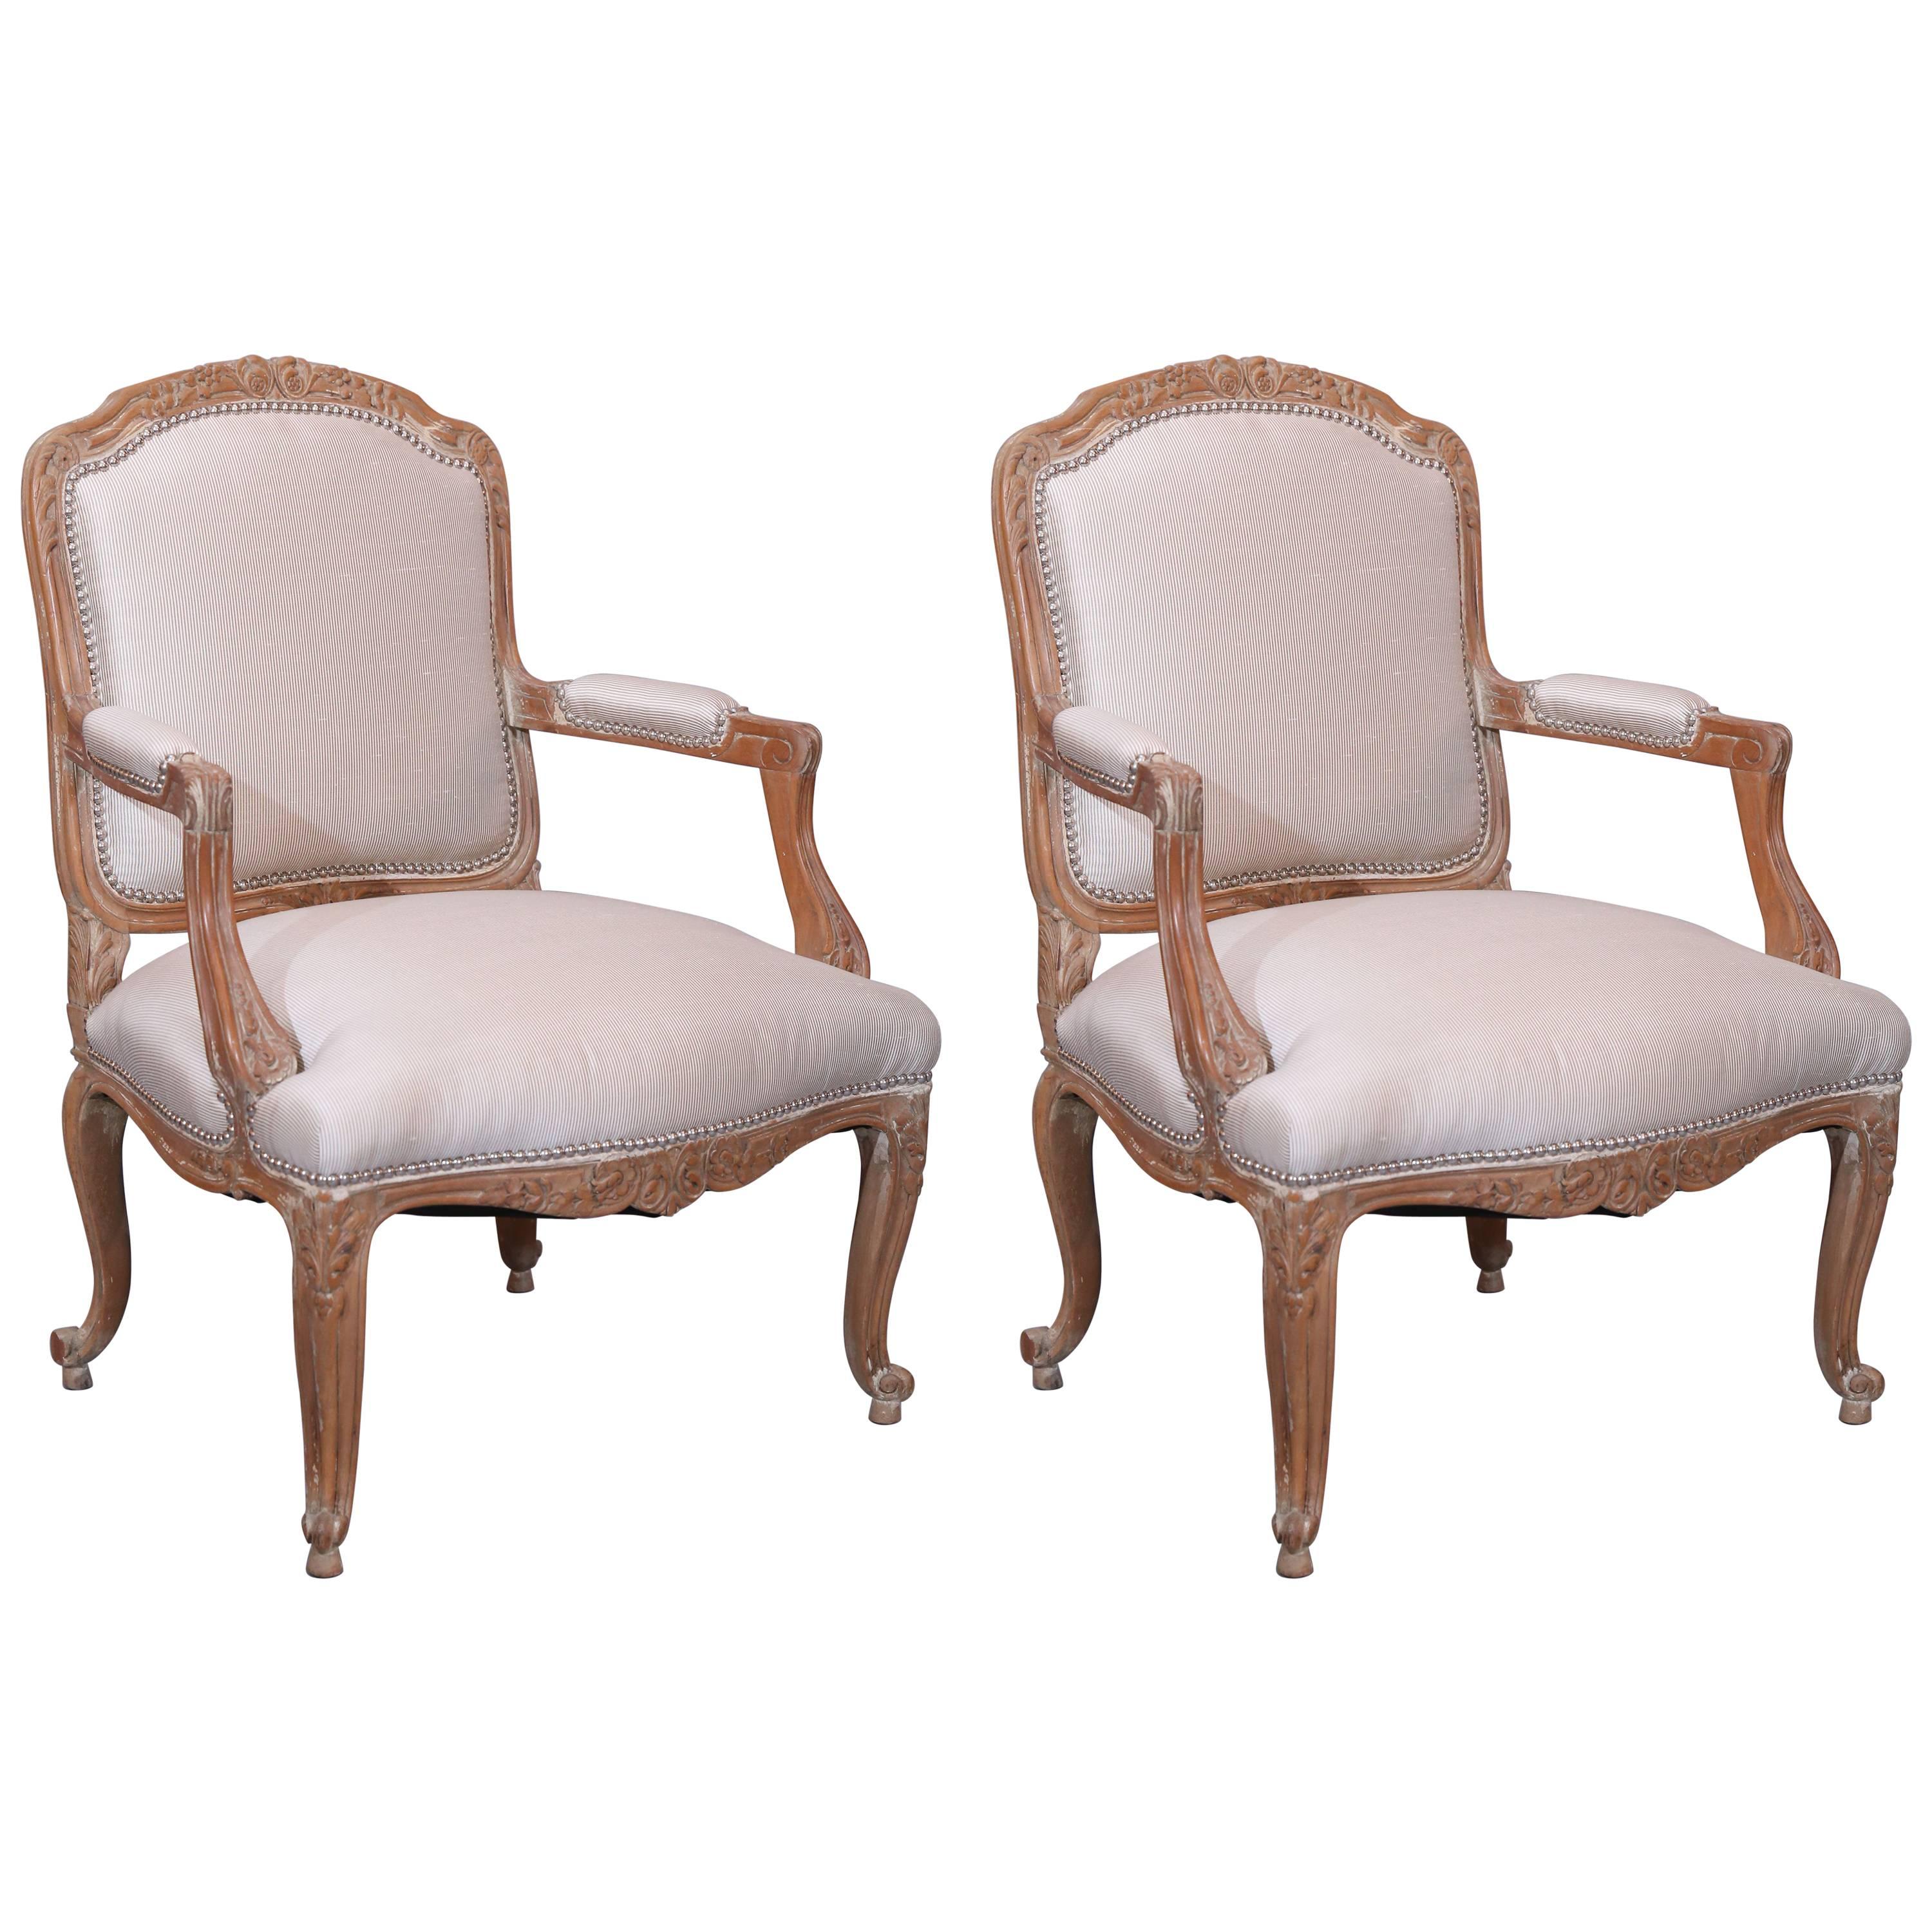 Pair of Pickled Reproduction Fauteuils with Stripe Silk and Nailhead Trim For Sale